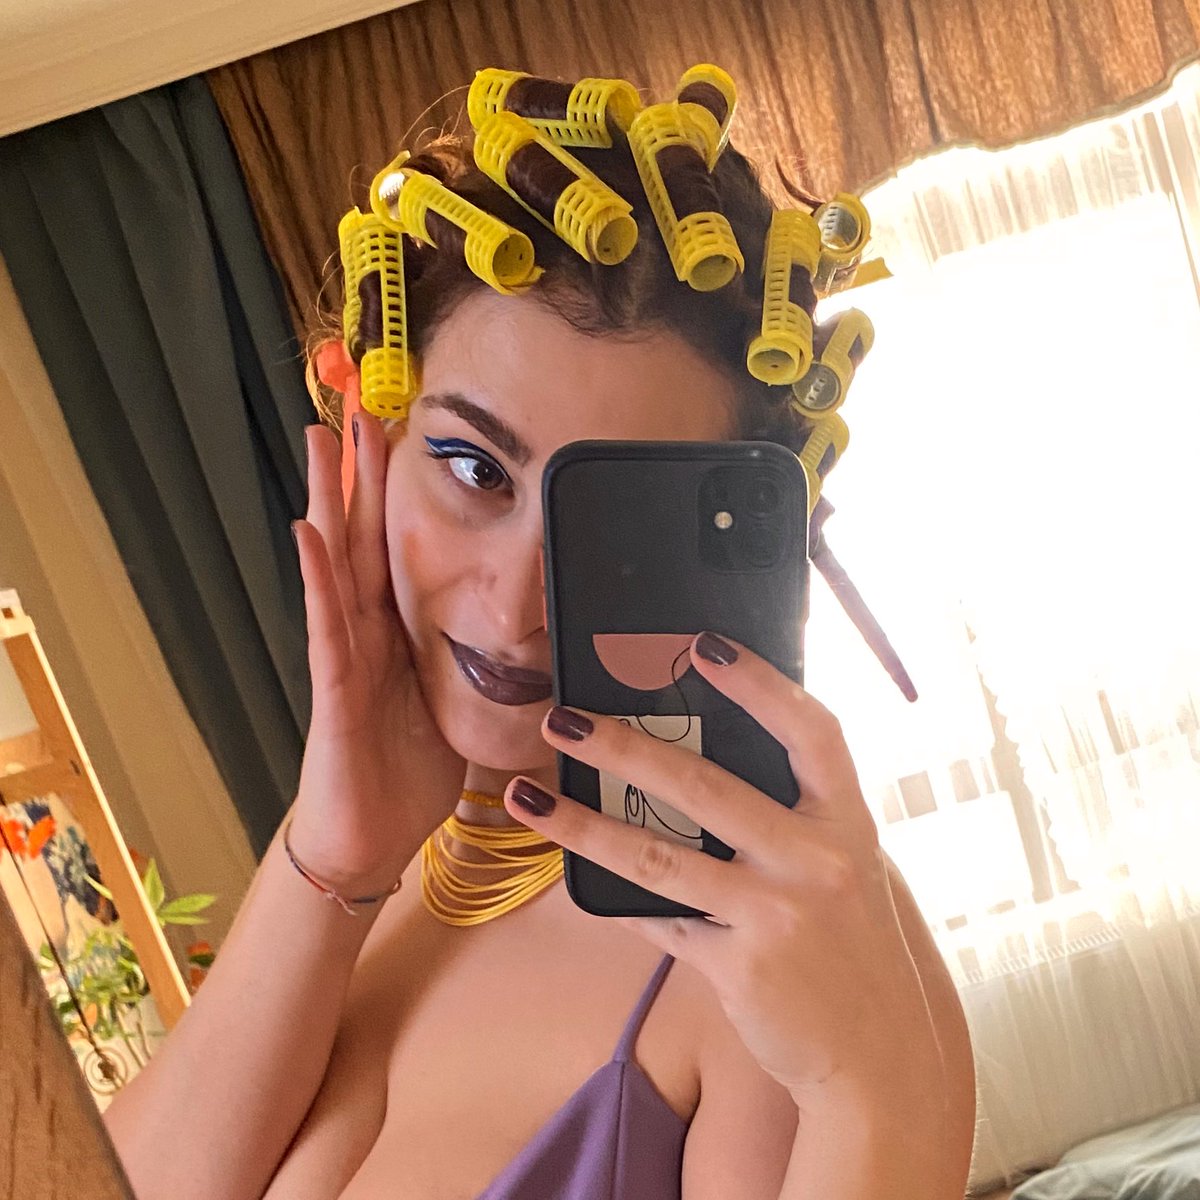 normalize 👏 hair rollers👏 as 👏 acsessories 👏